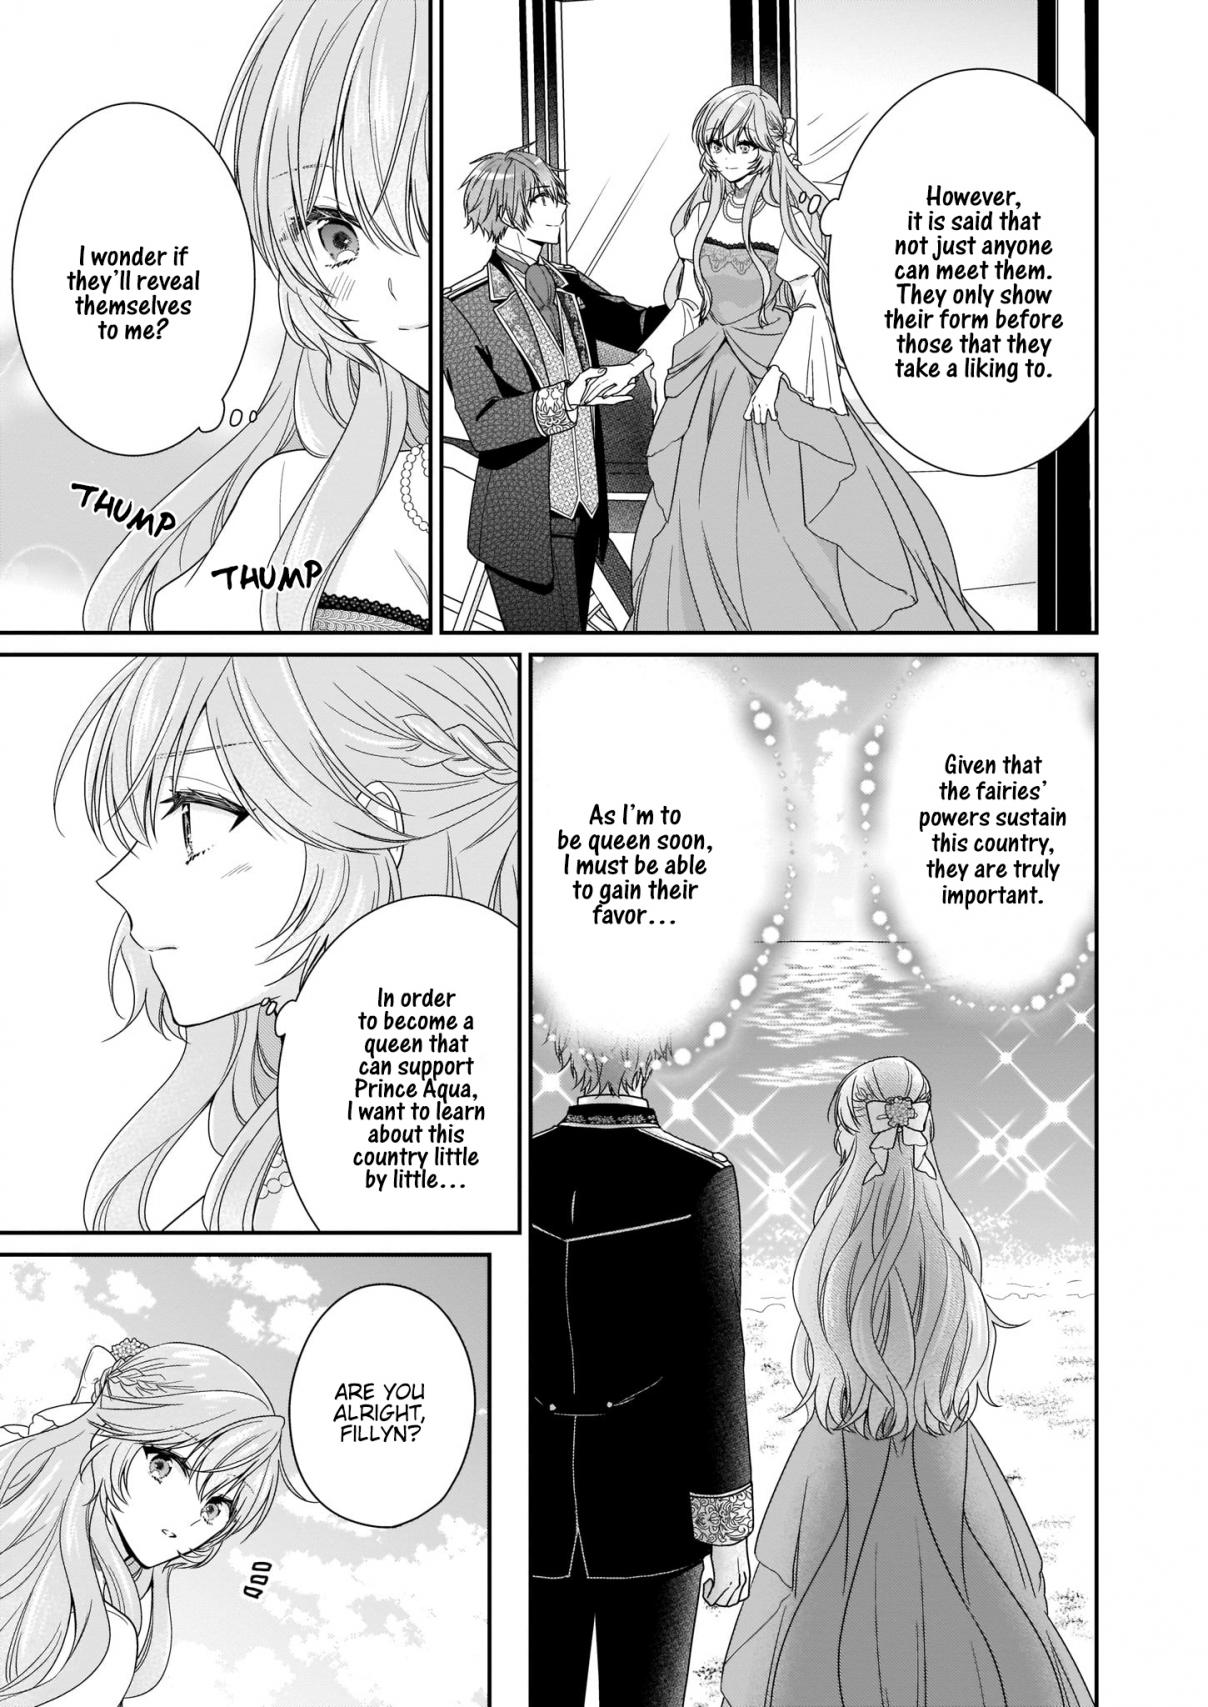 The Villainess Is Adored by the Crown Prince of the Neighboring Kingdom Vol. 4 Ch. 13